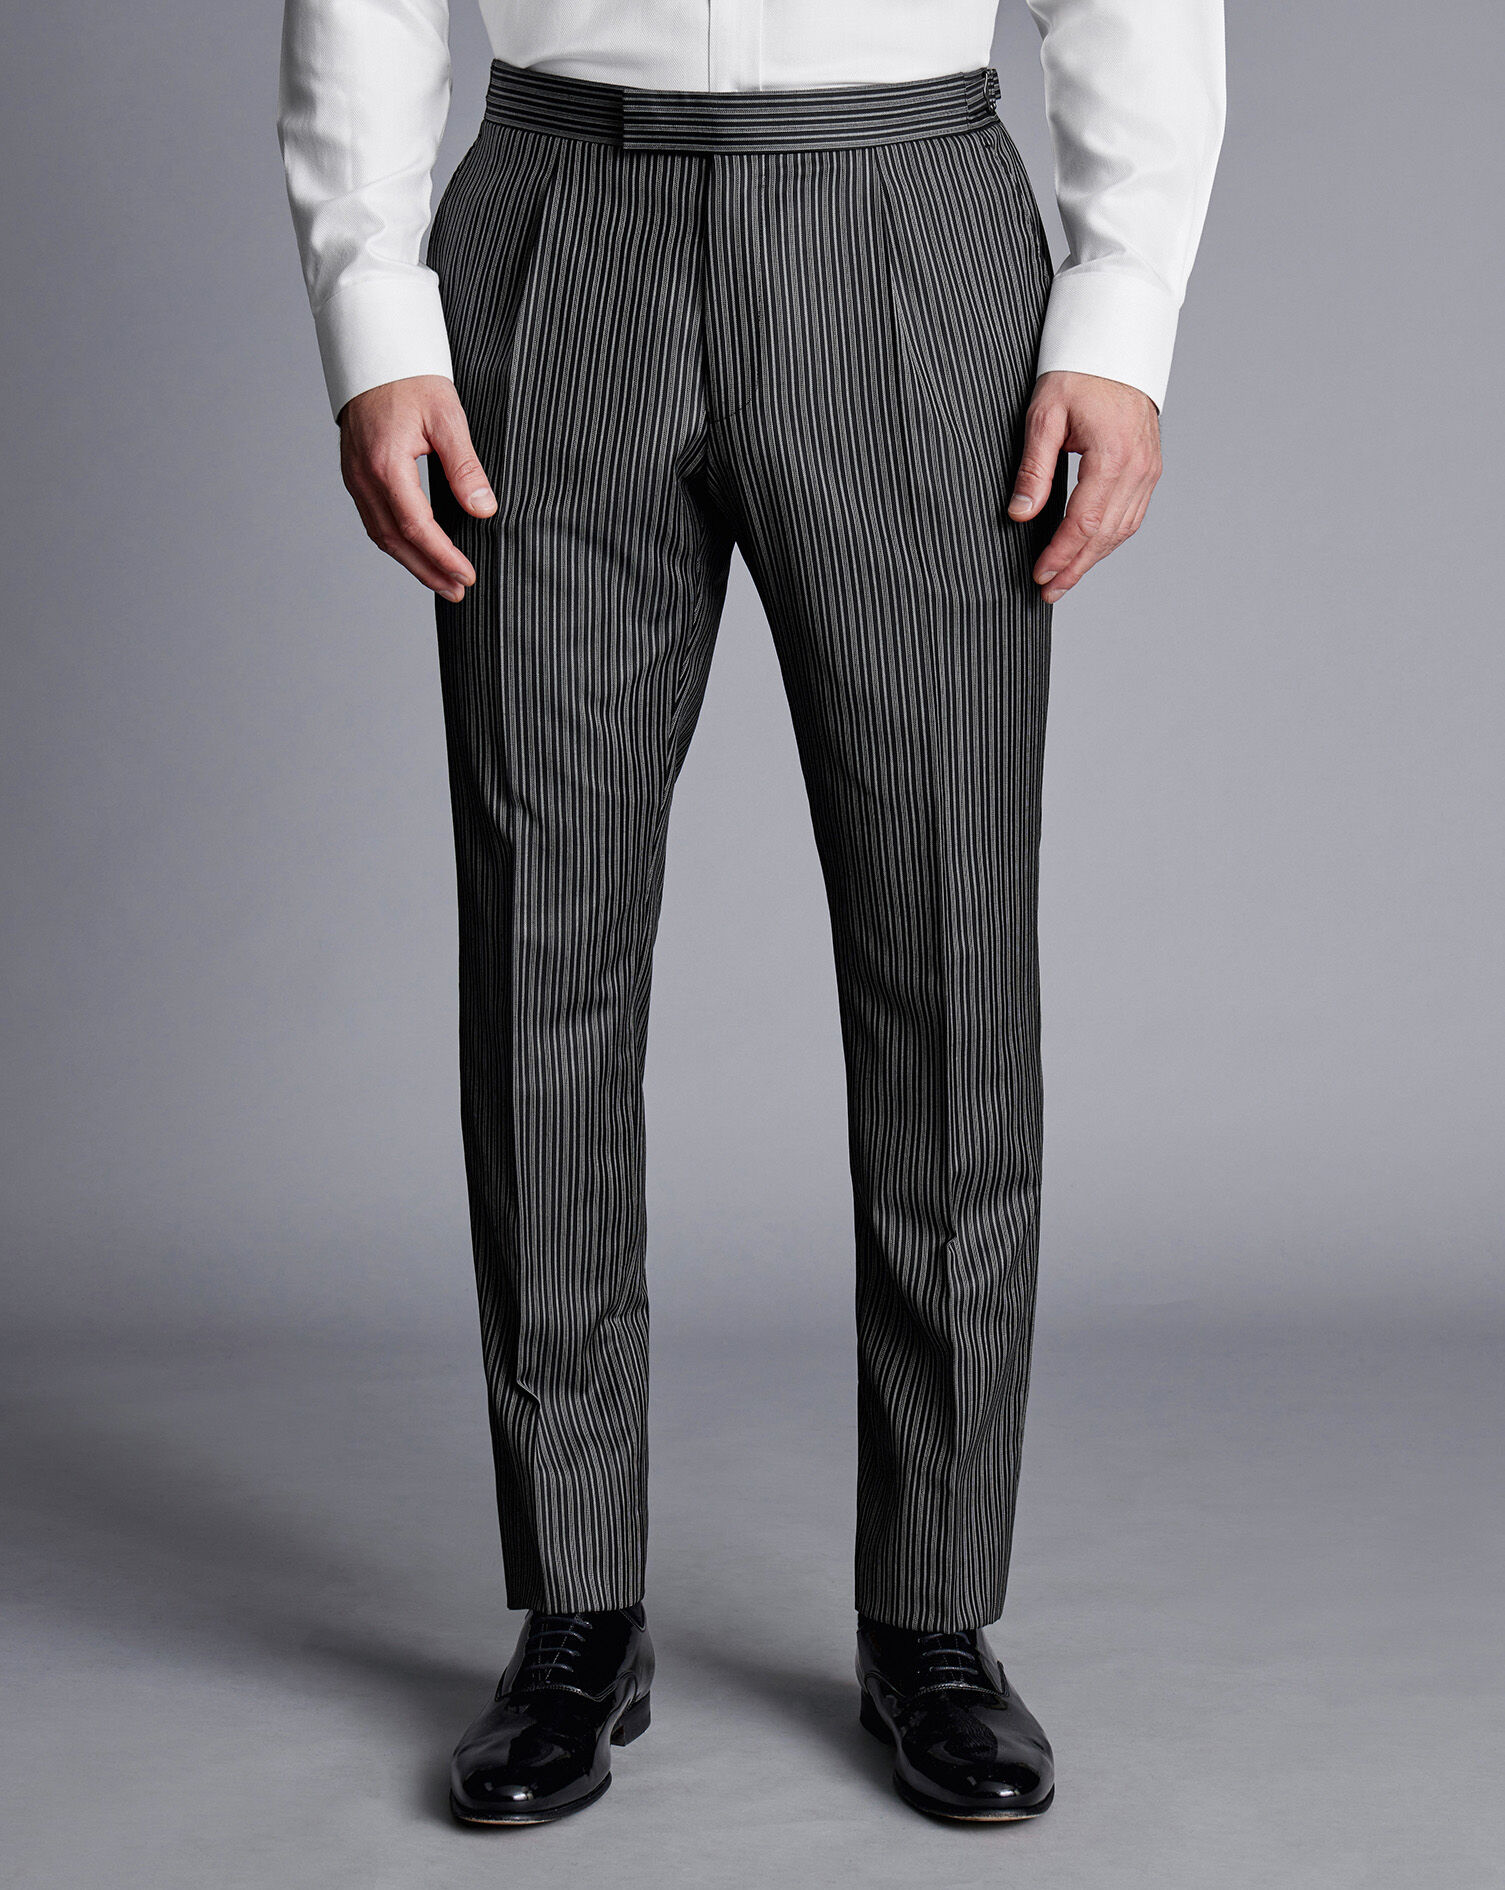 Gibson London  Blue Striped Slim Fit Trousers  Suit Direct